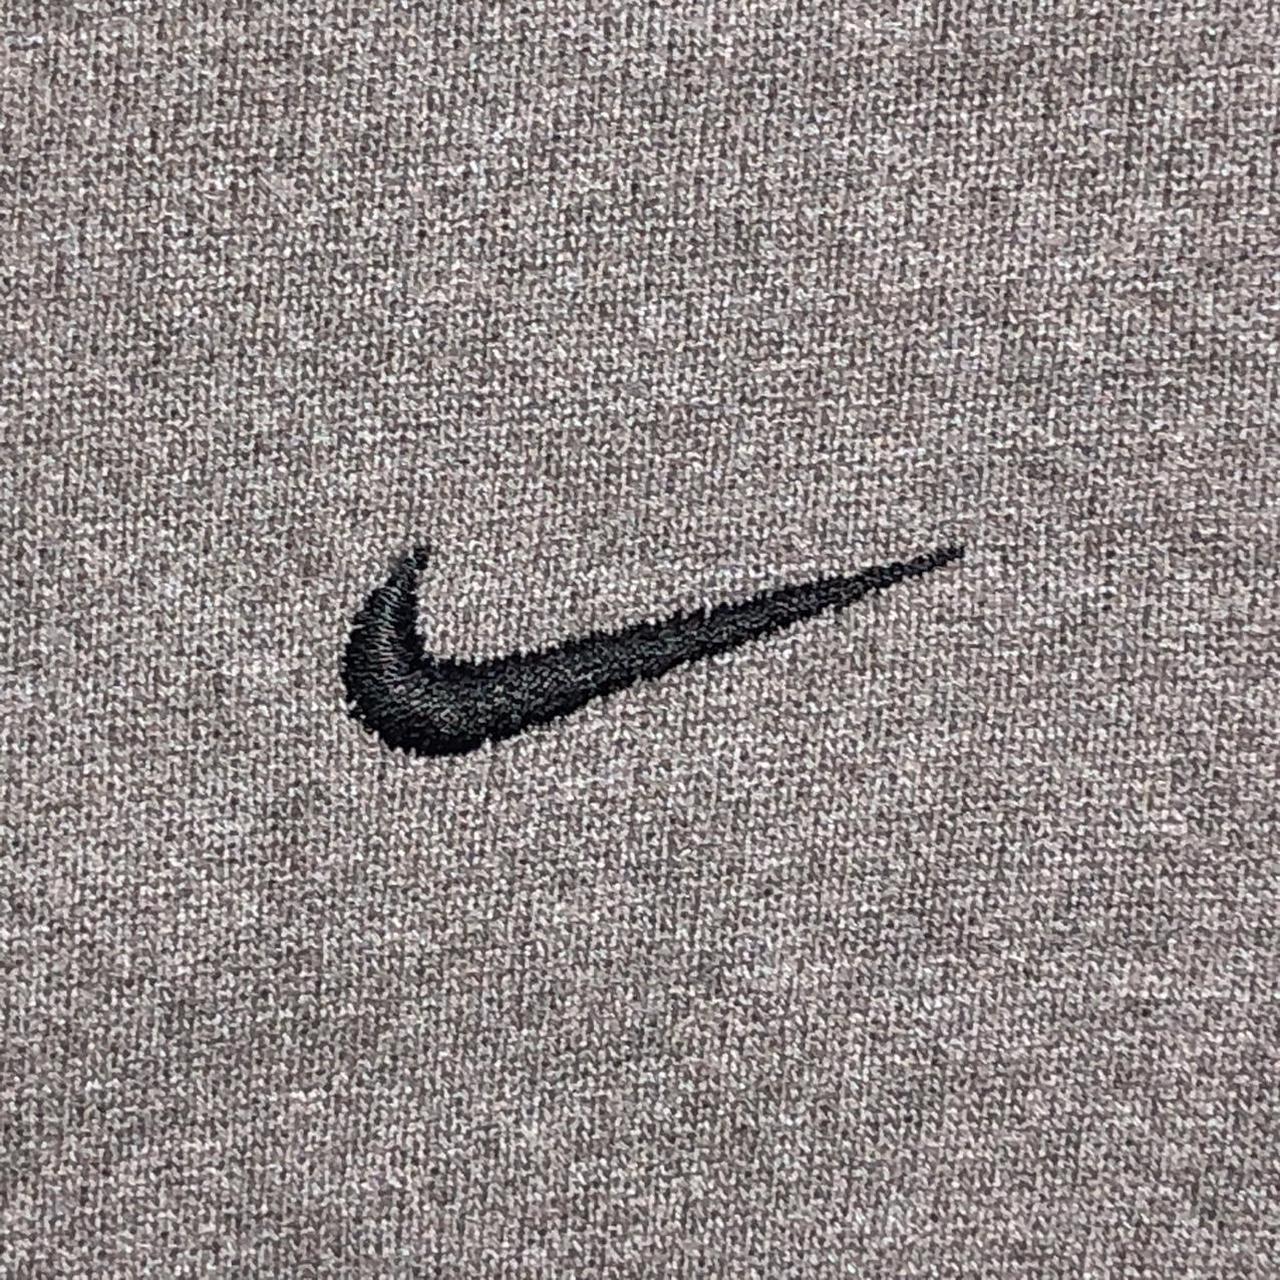 Product Image 2 - Nike Embroidered Logo Crewneck
Dated: 2000s

-embroidered